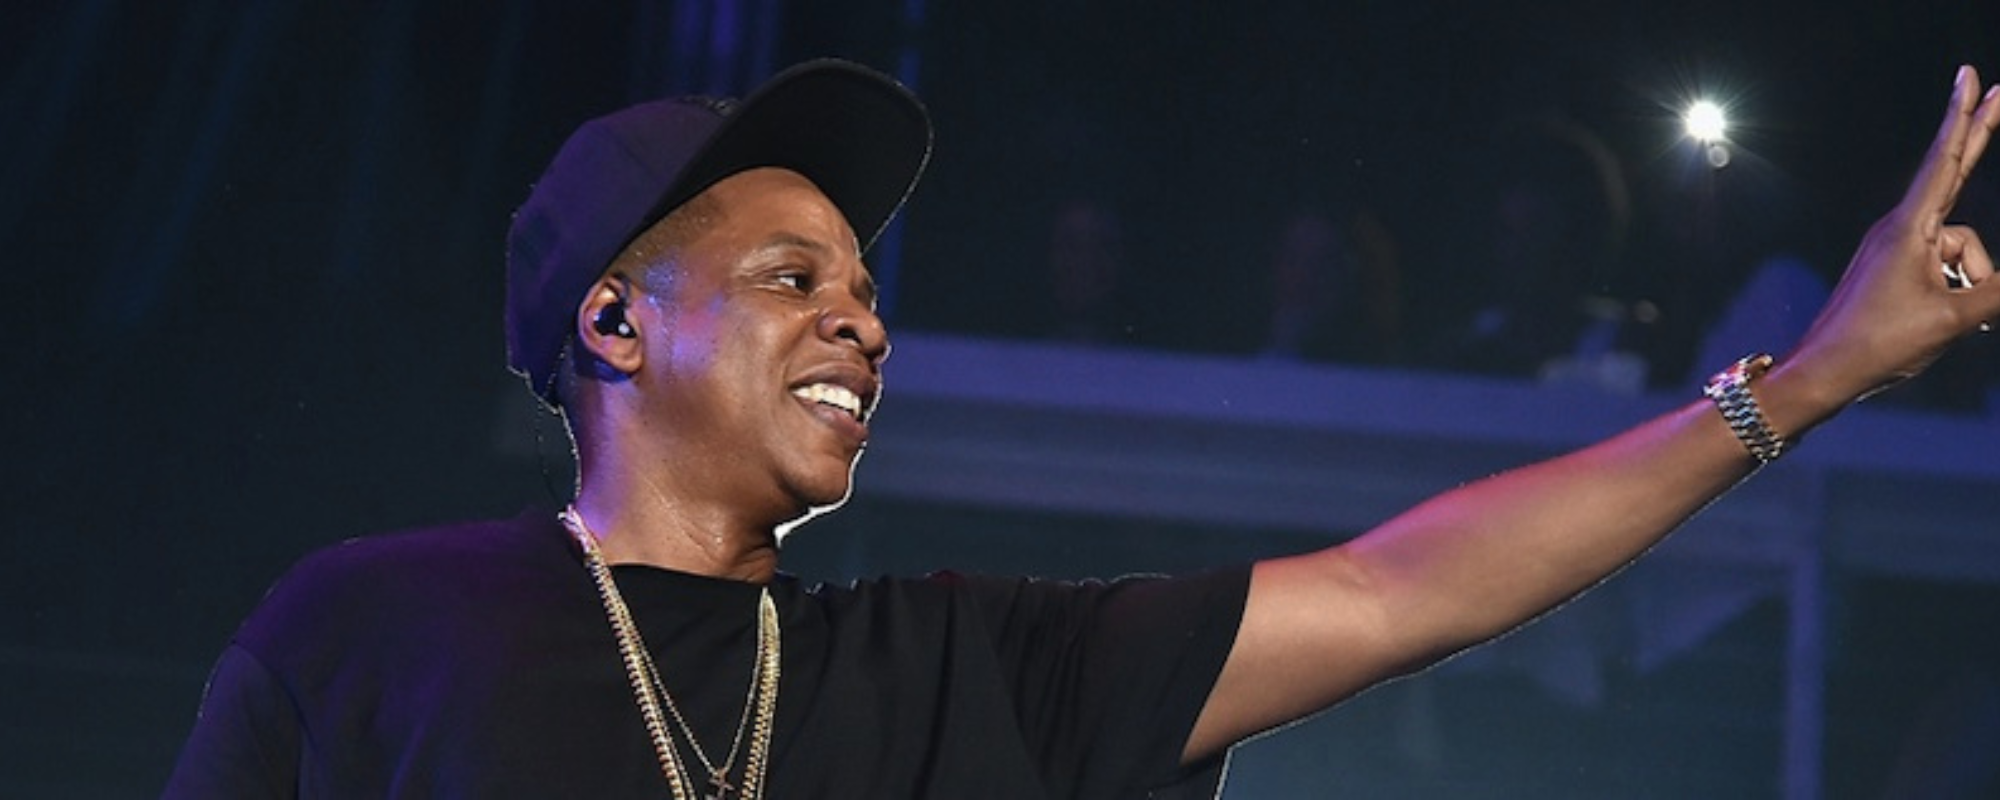 5 Times Jay-Z Used His Platform to Advocate for Social Justice